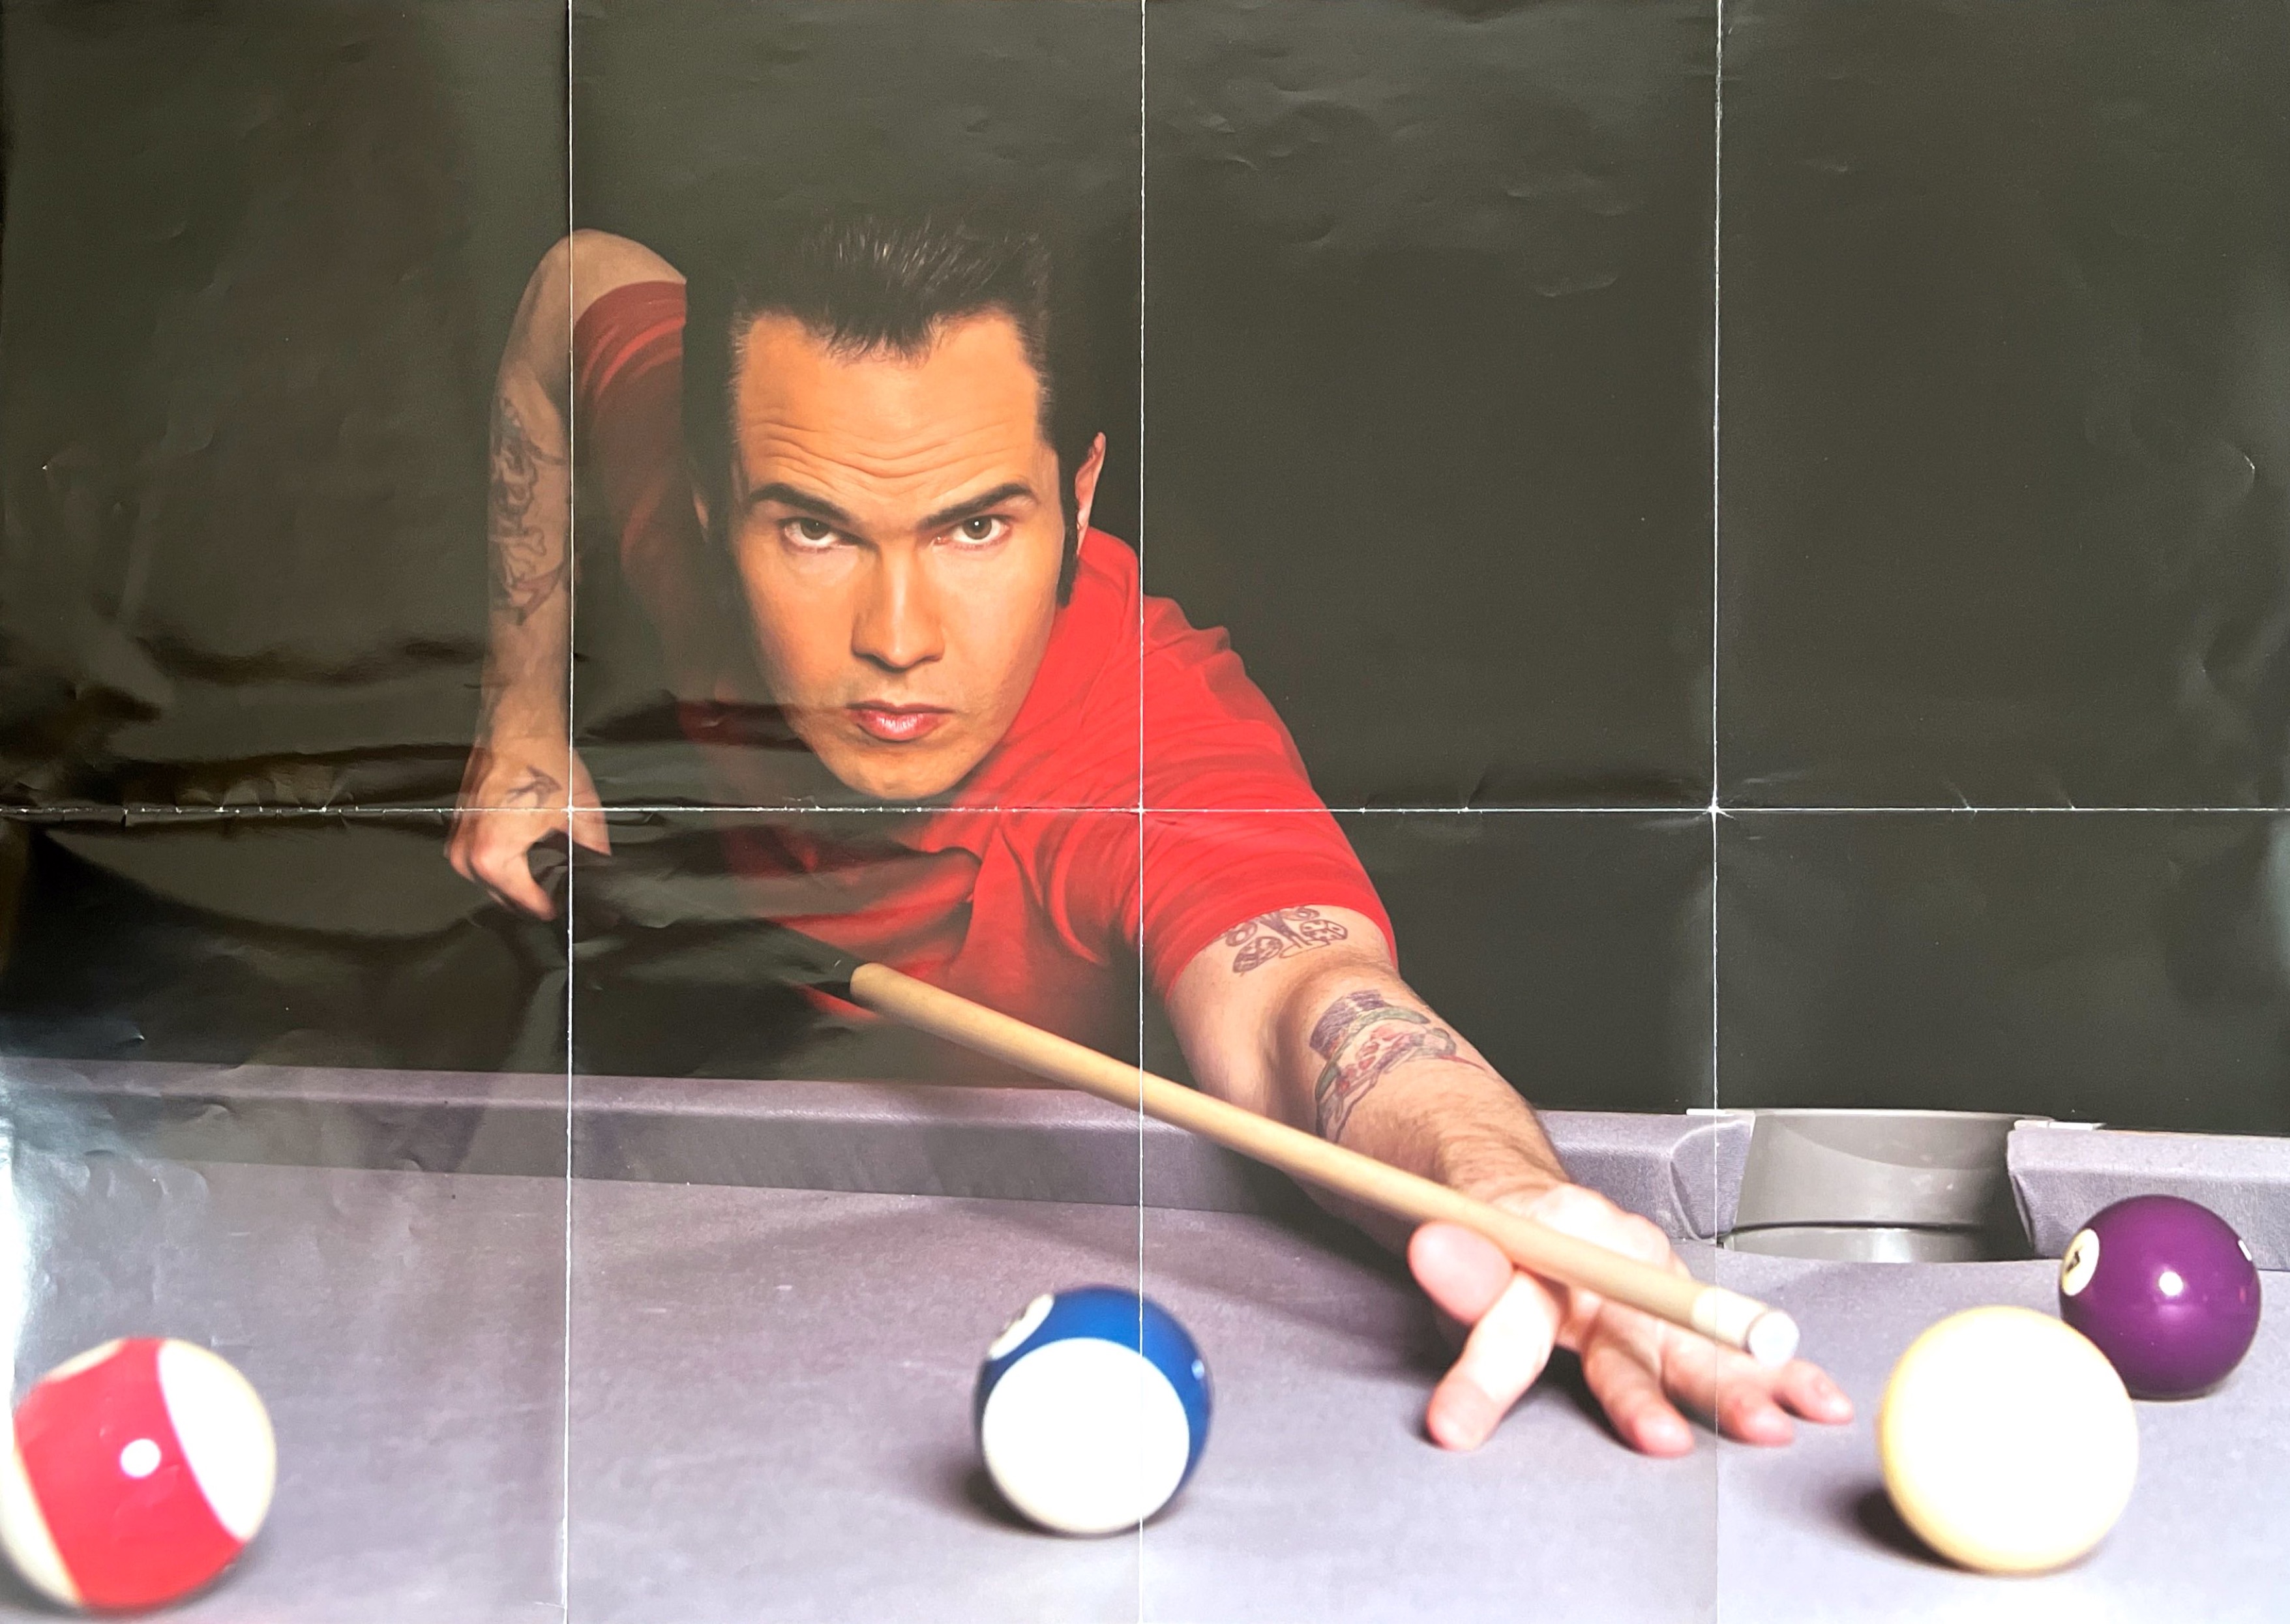 A large landscape poster, showing a photo of Jimmy Carr lining up a shot on a pool table.